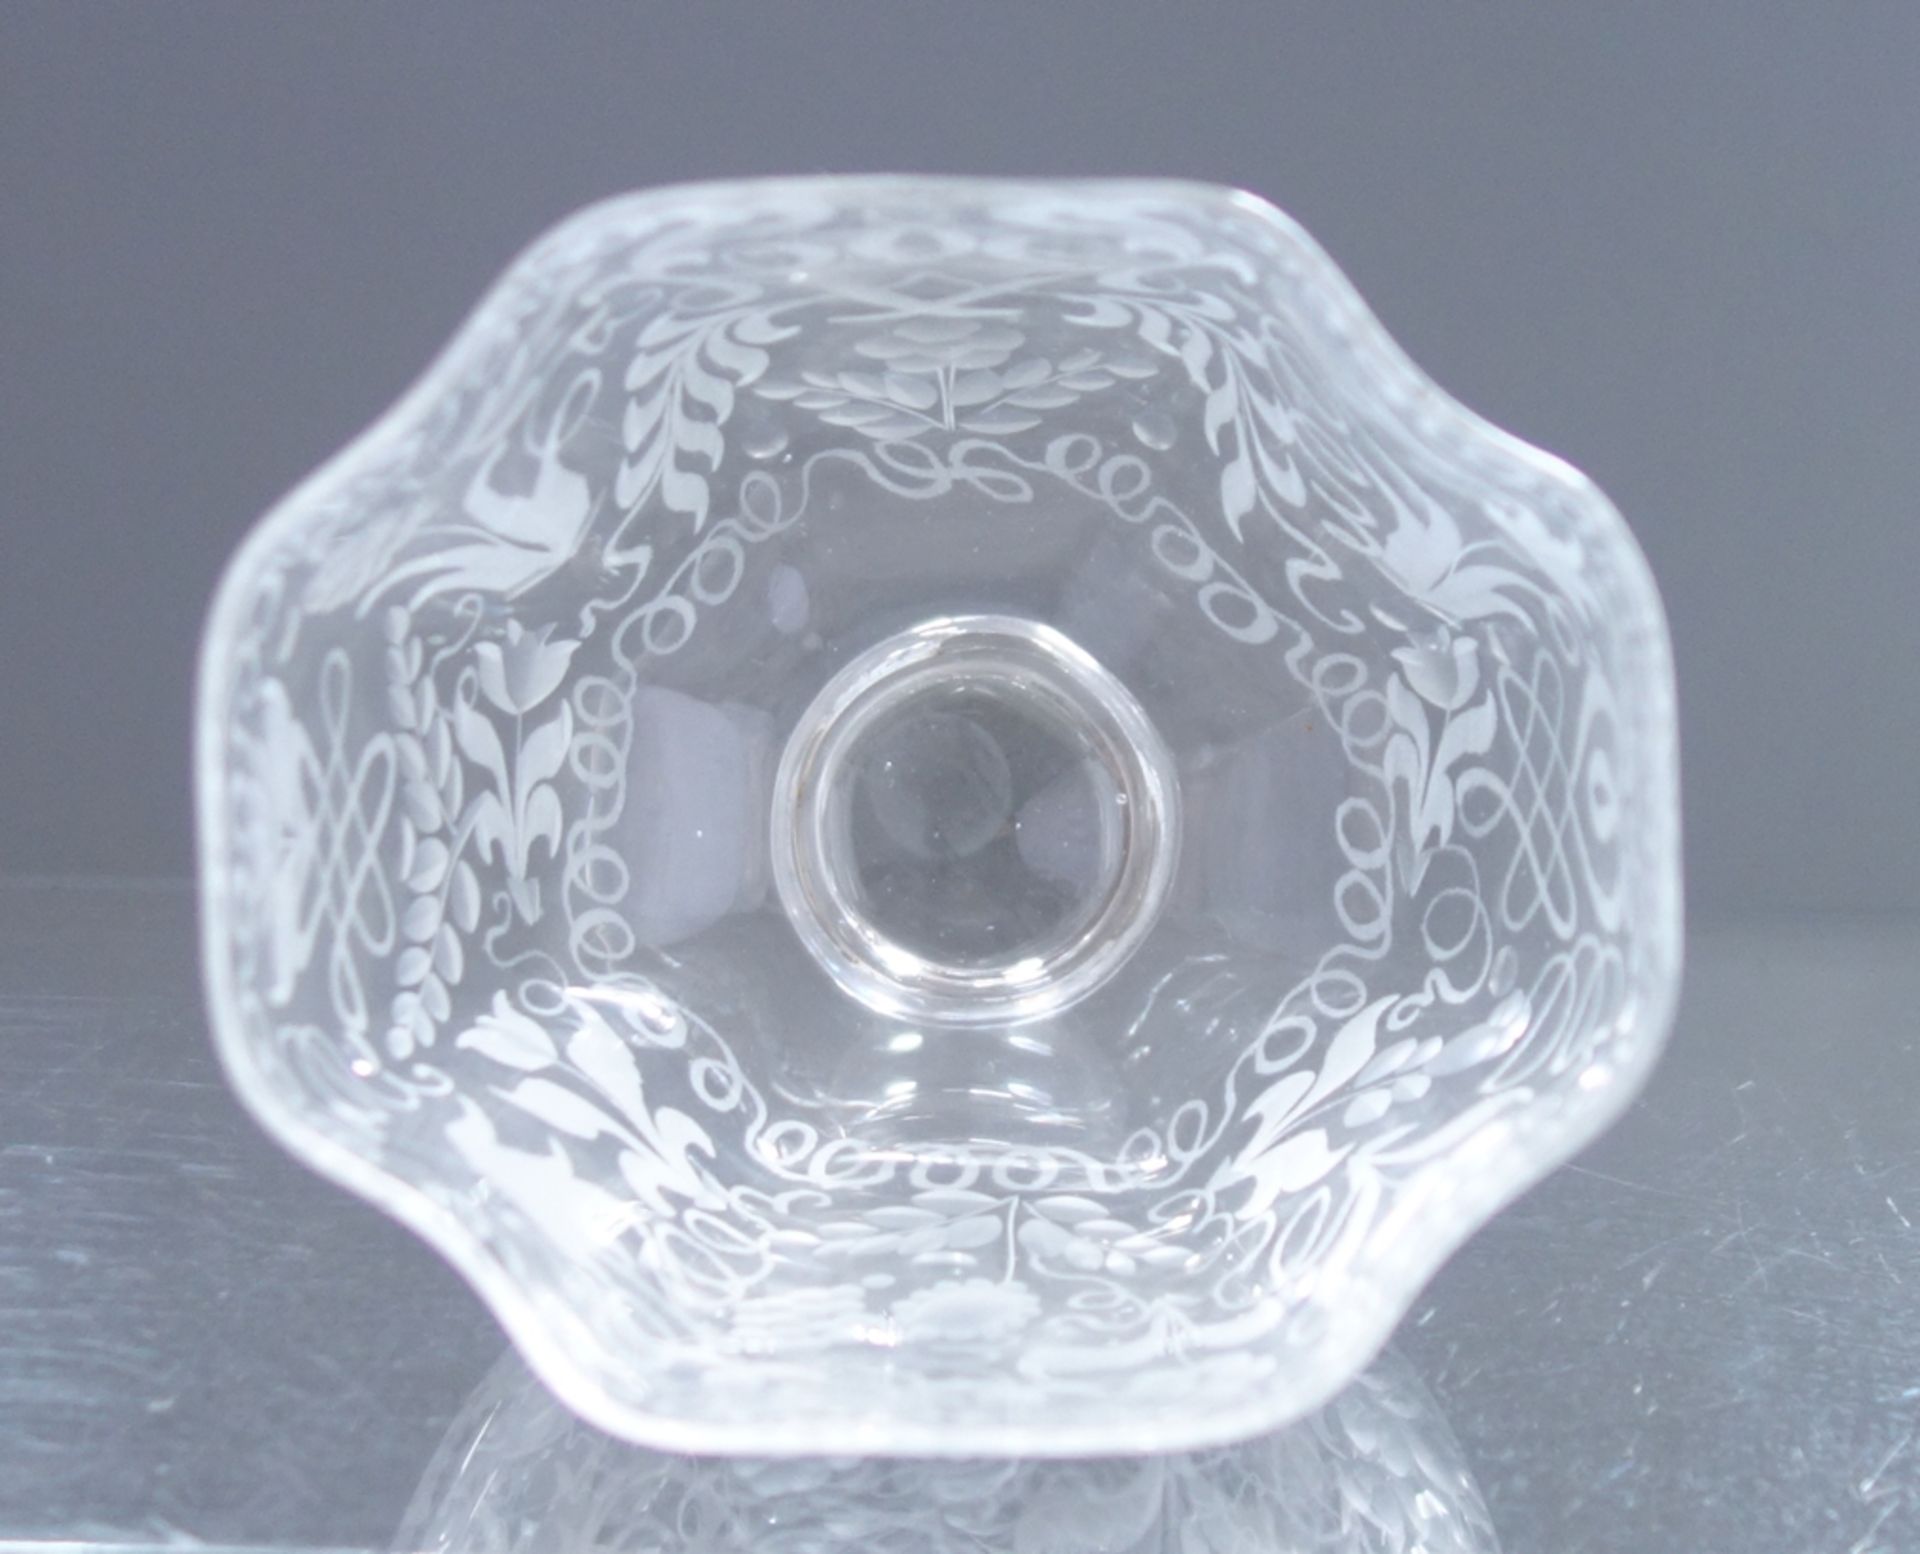 21 high quality wine glasses with delicate floral engraving, 1st half 20th c. - Image 3 of 5